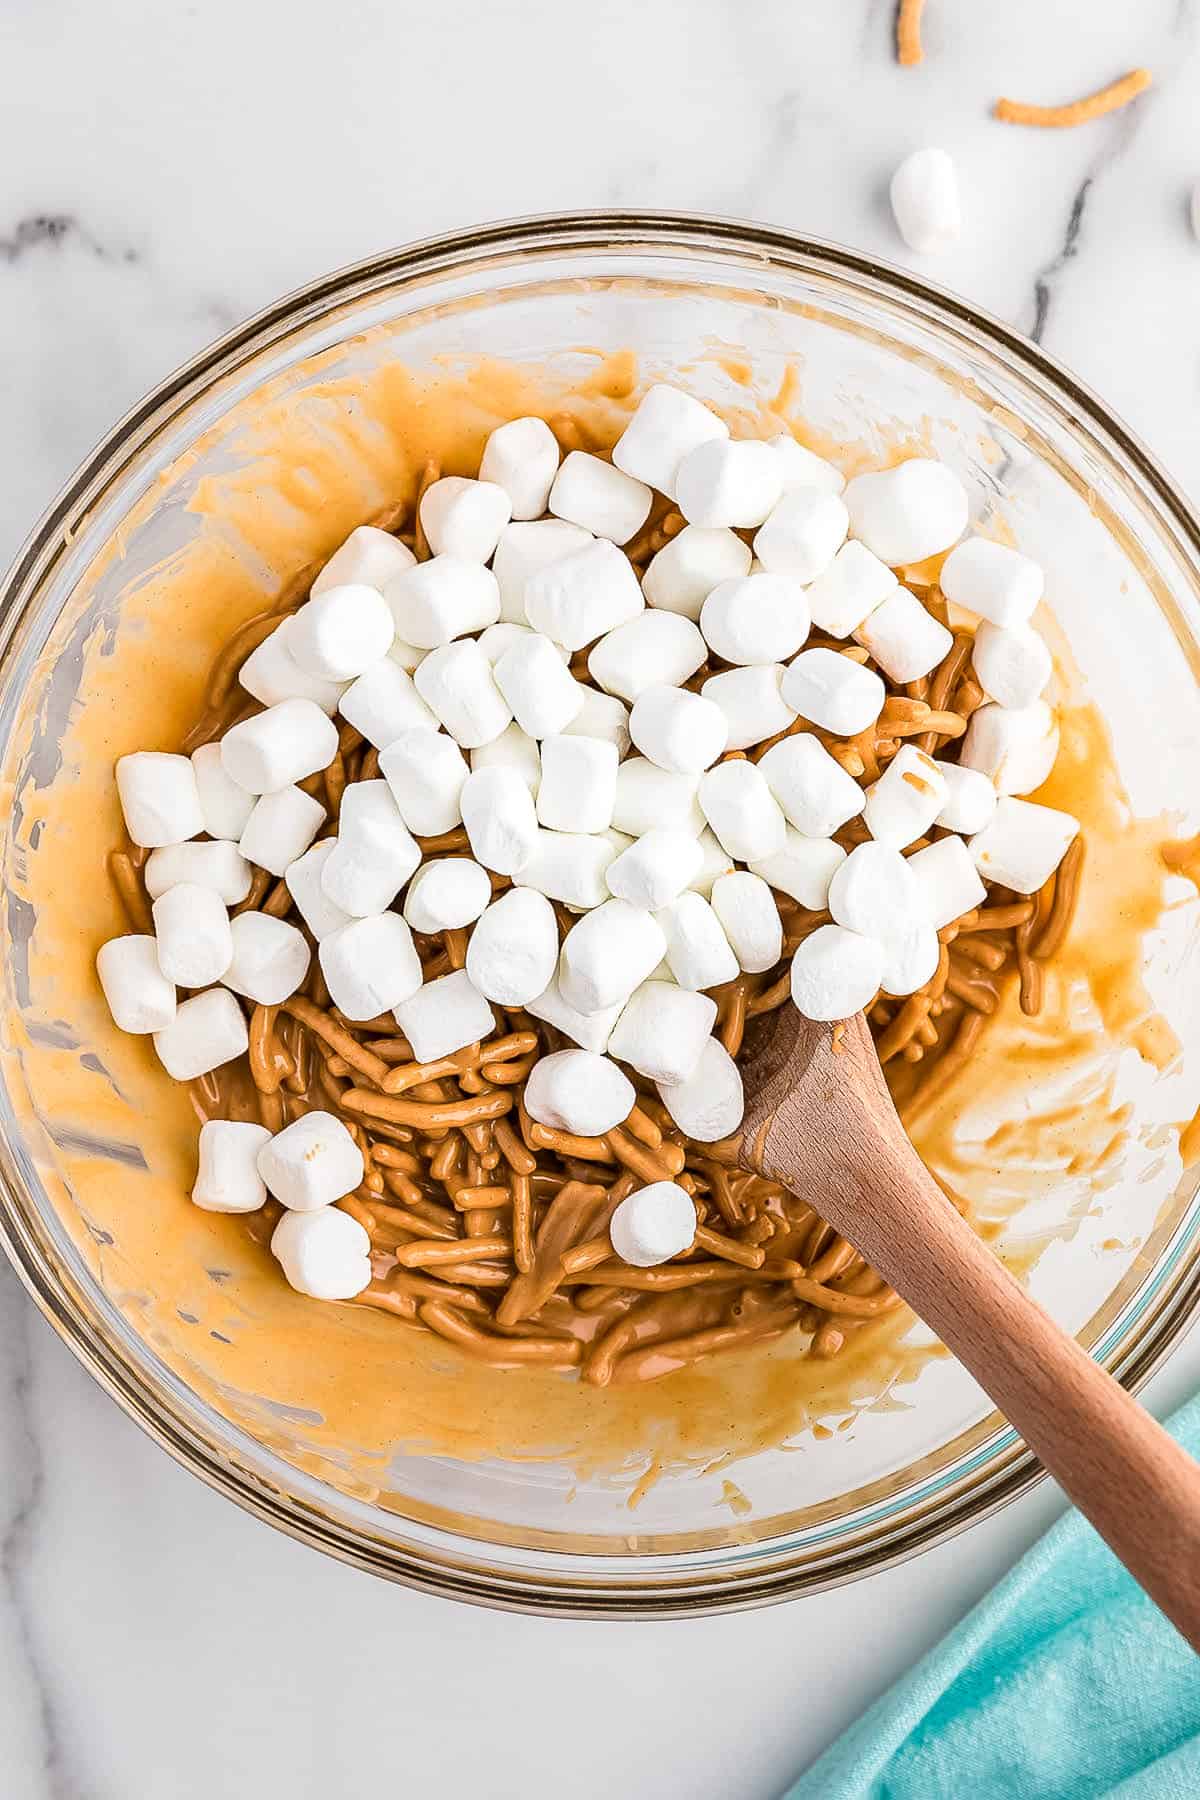 Add in Marshmallows to the mixture.